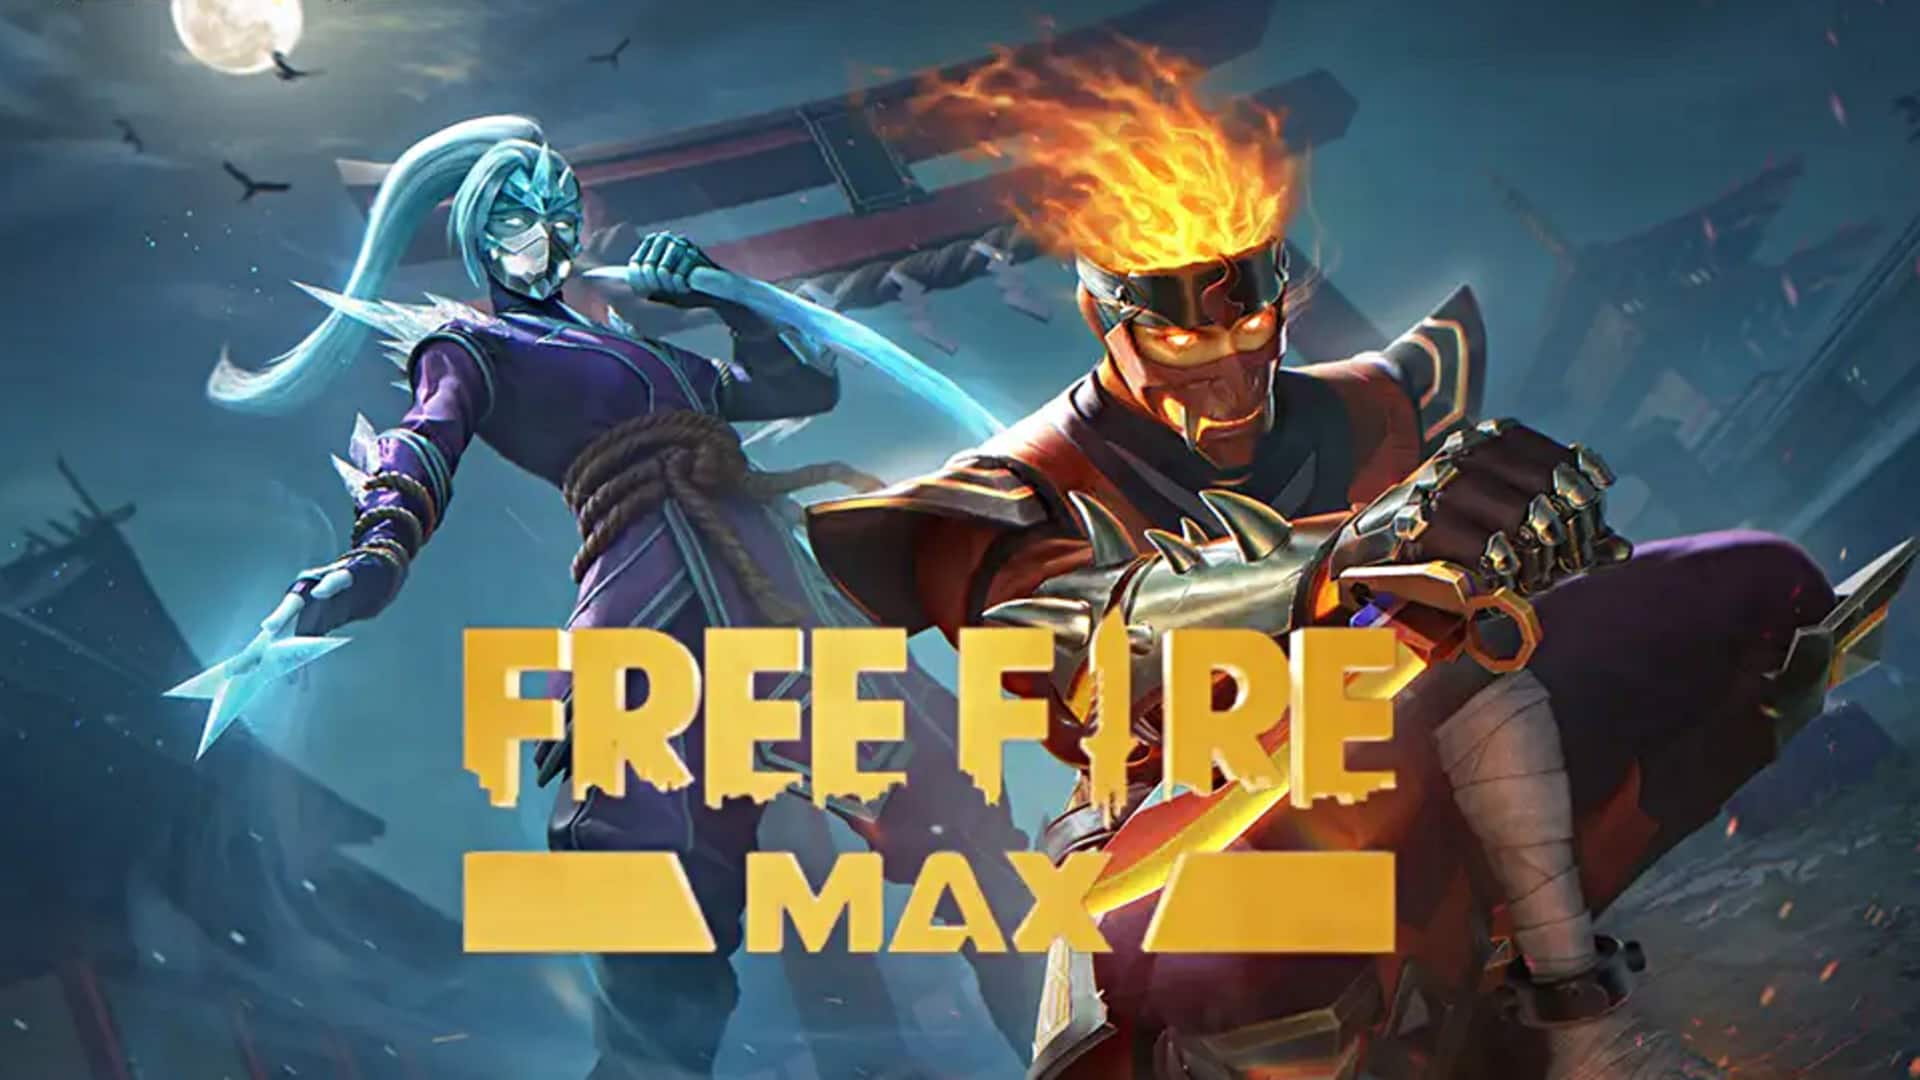 Free Fire MAX codes for February 2: How to redeem